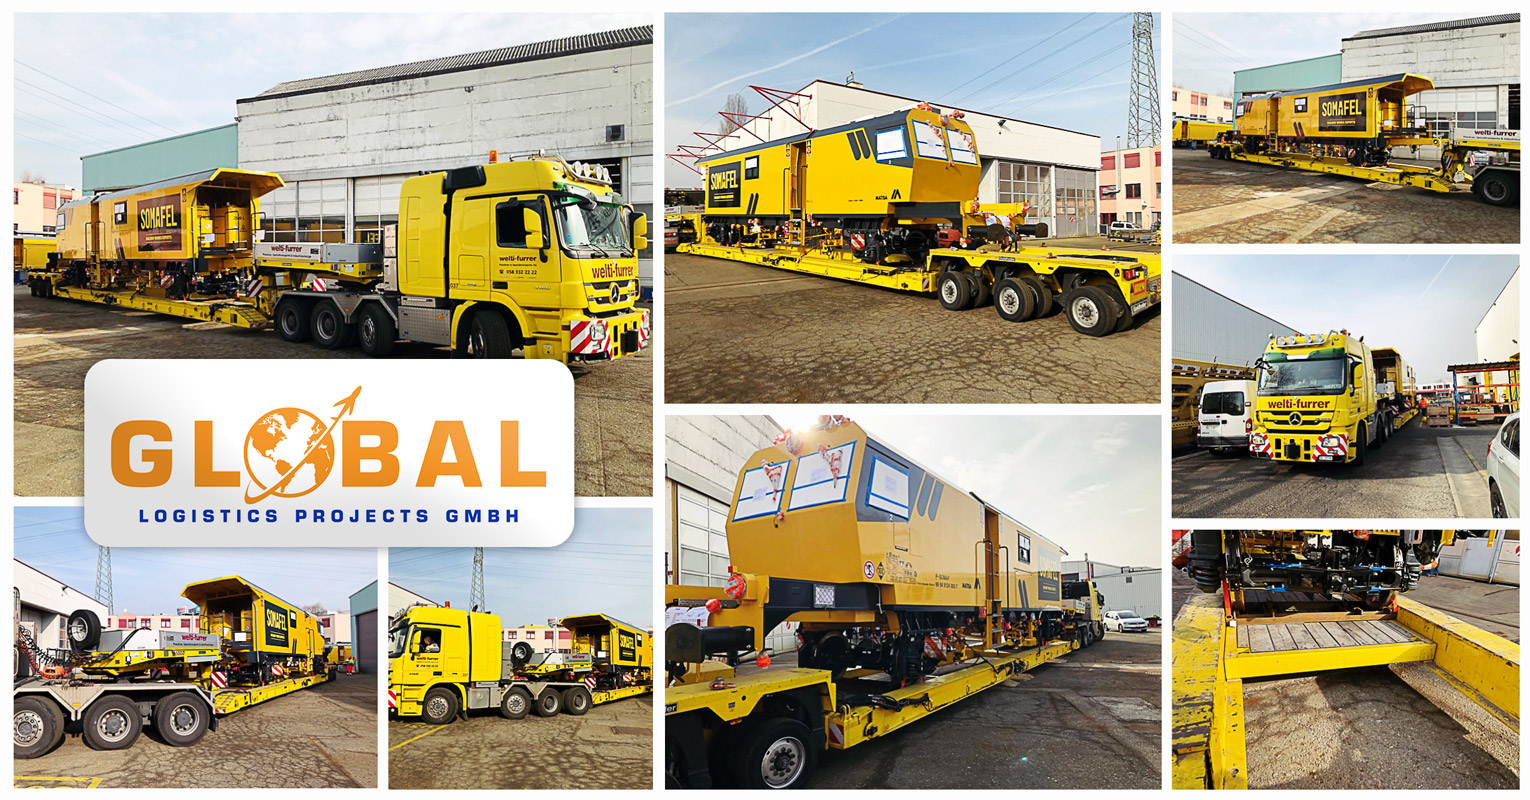 Global Logistics Projects Handled a 16m Long Rail Wagon Destined for Guarda, Portugal